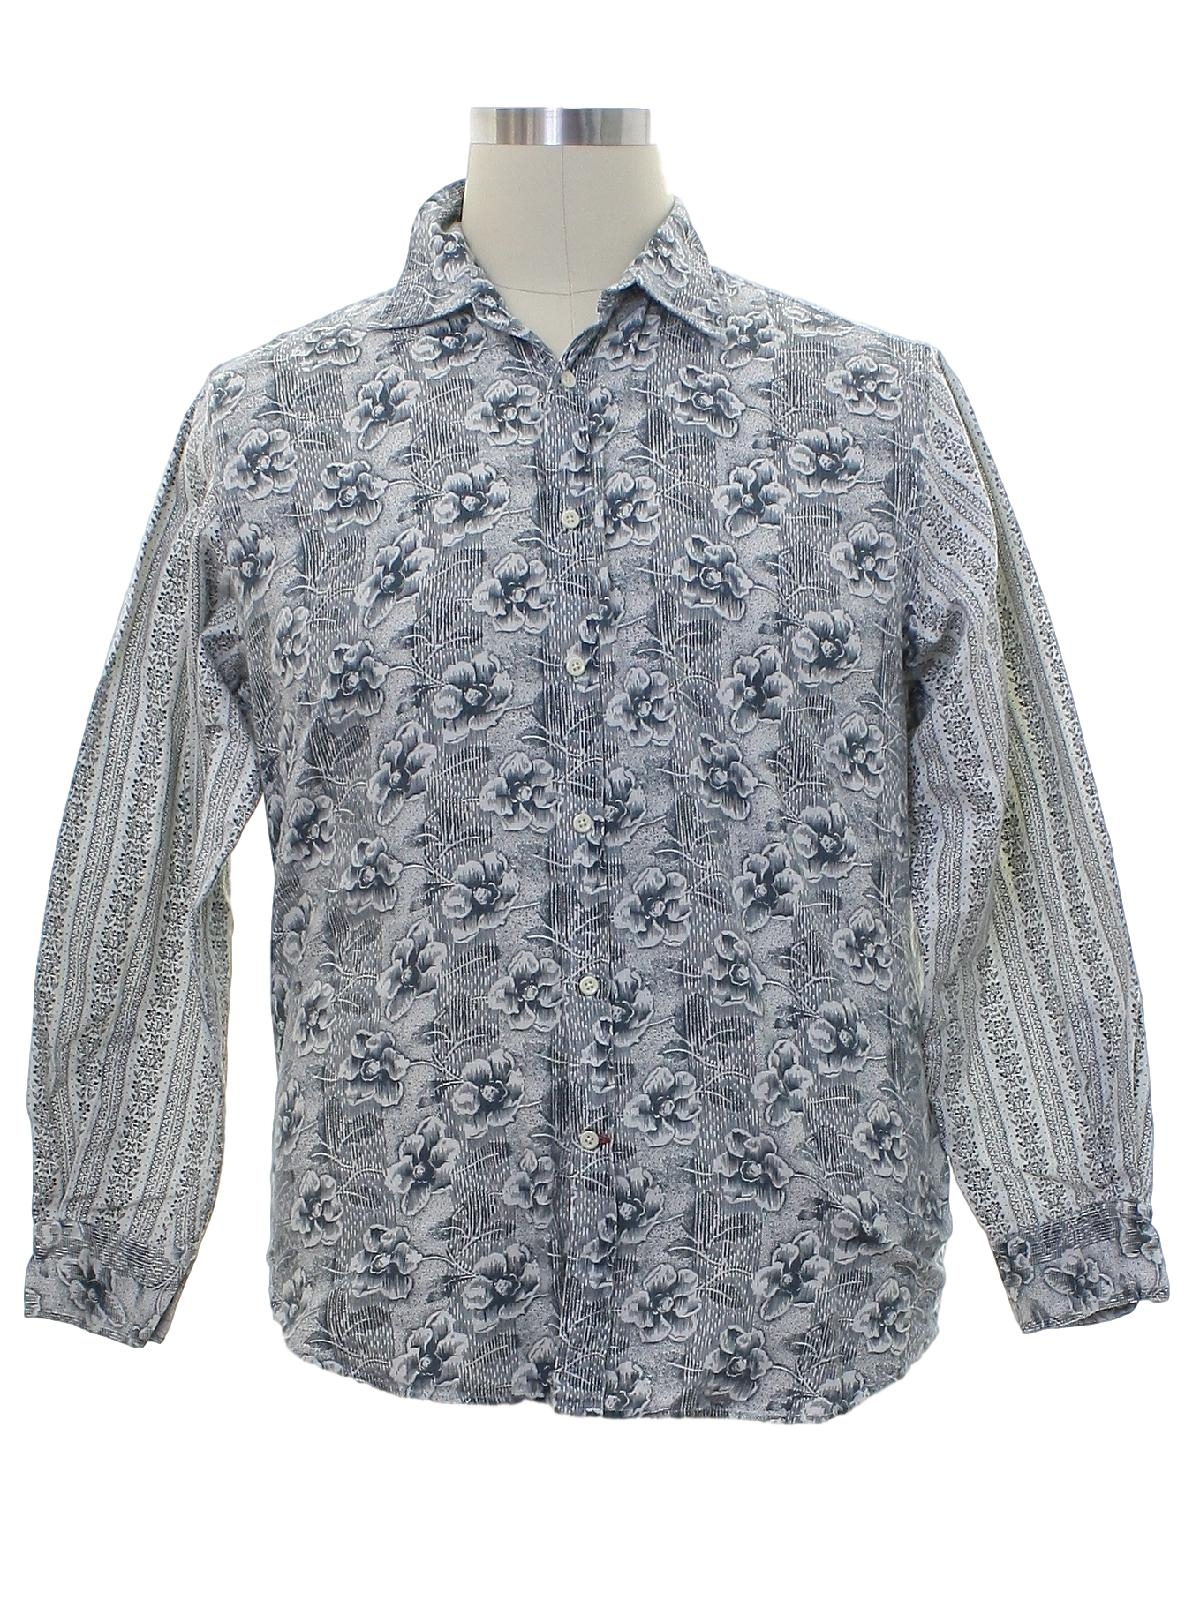 Guess Nineties Vintage Shirt: 90s or Newer -Guess- Mens gray, white ...